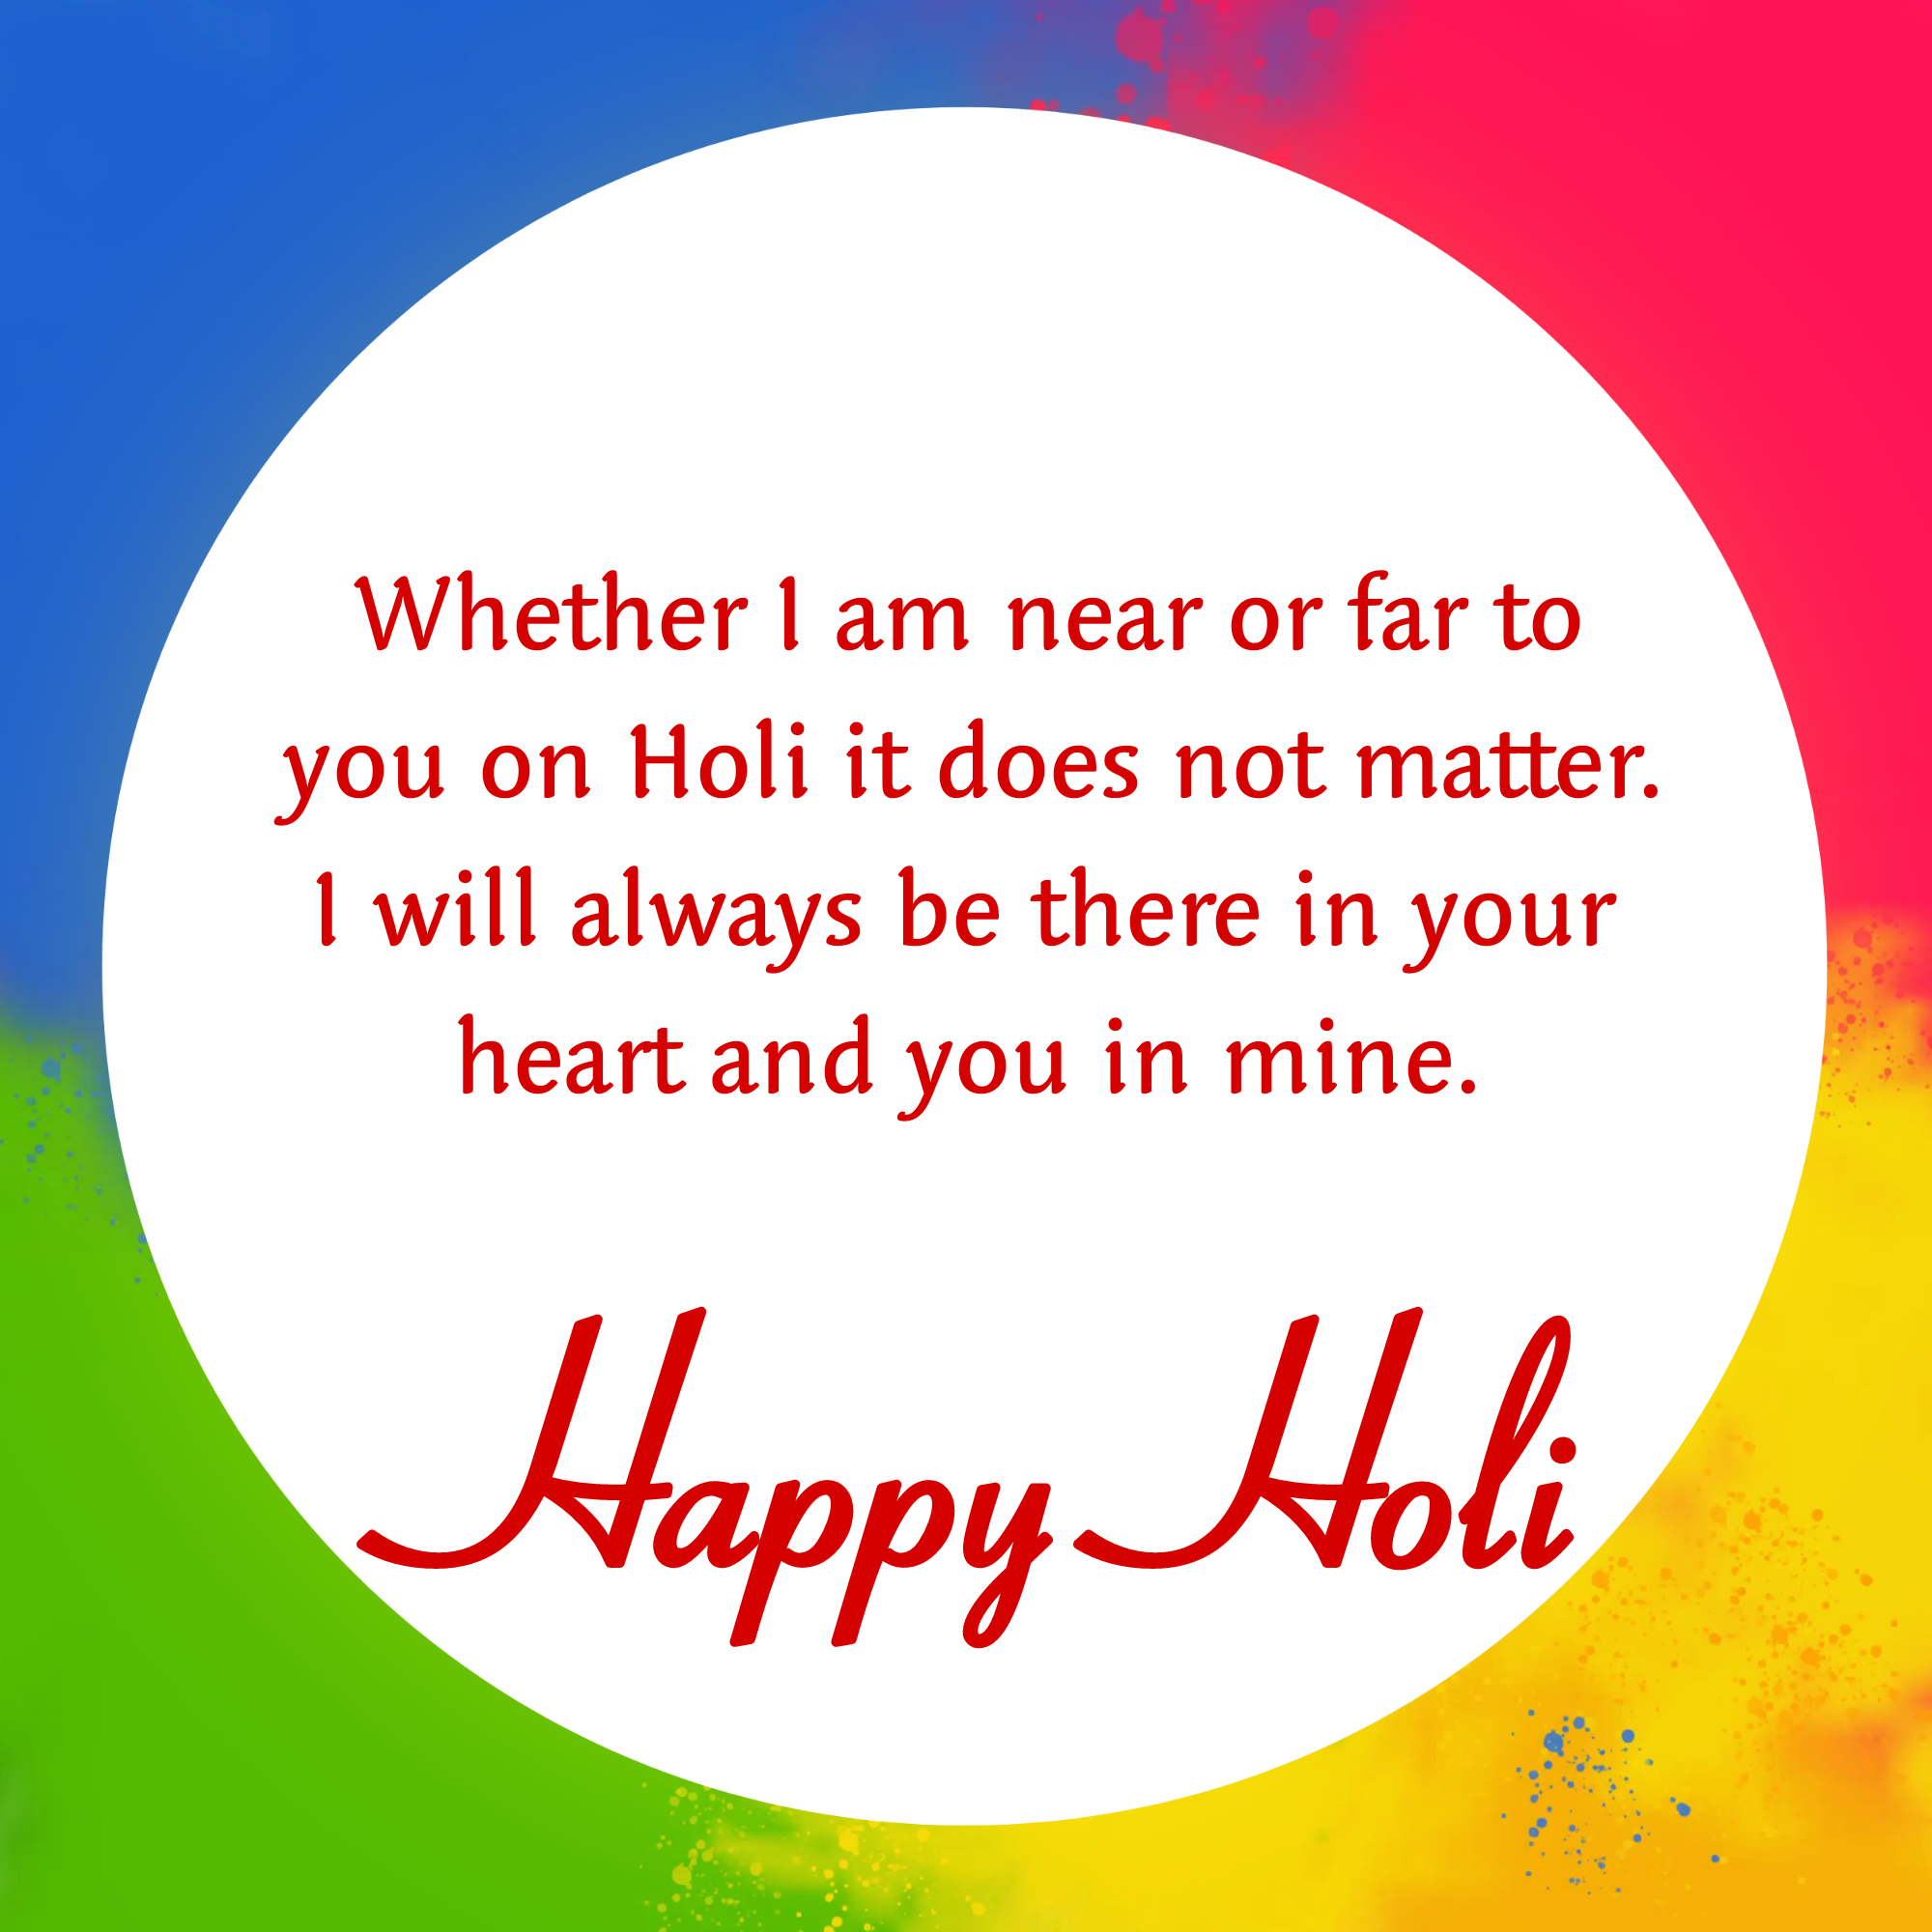 Whether I am near or far to you on Holi it does not matter